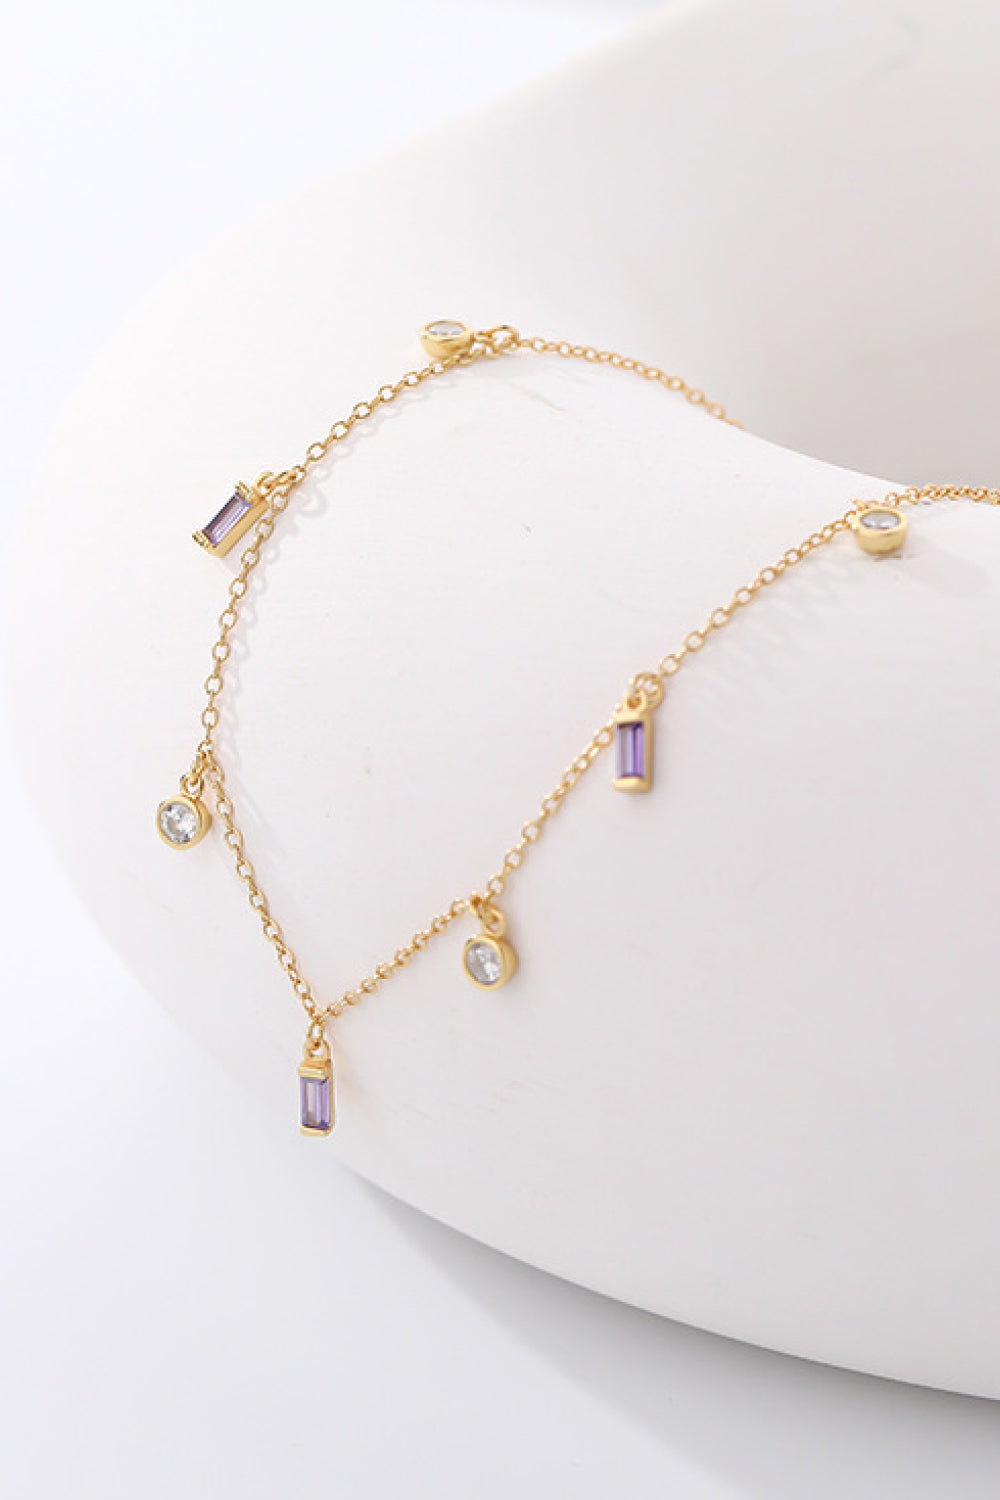 Lavender 18K Gold Plated Multi-Charm Chain Necklace Sentient Beauty Fashions Jewelry